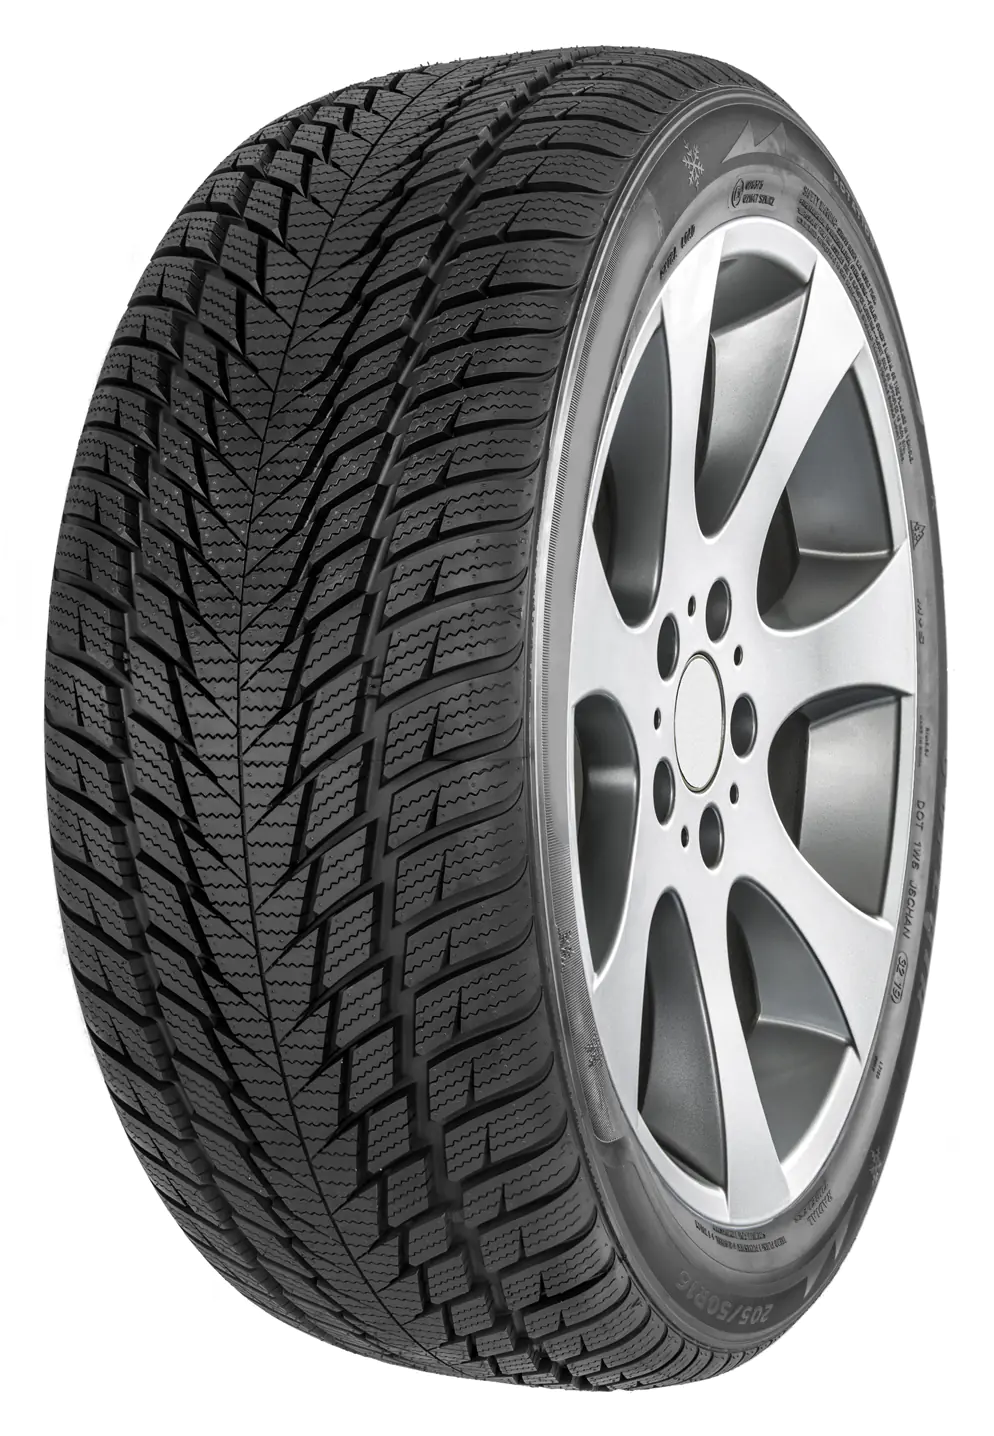 Gomme Autovettura Atlas 205/45 R16 87H POLARBEAR UHP2 XL M+S Invernale